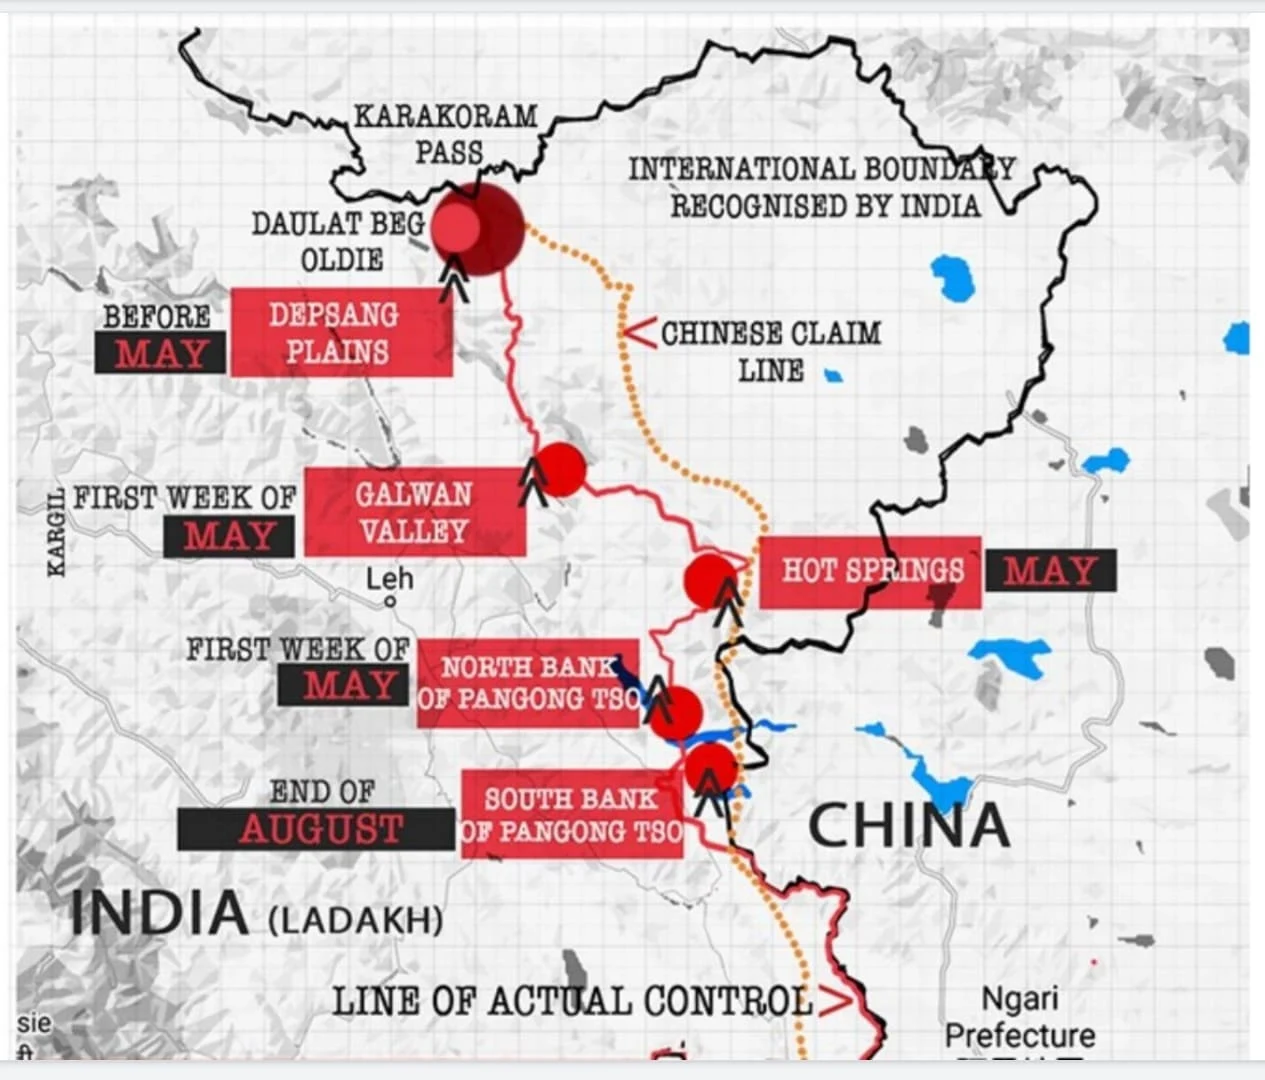 Disengagement in Ladakh, Reinforcement in Arunachal    WHAT'S HAPPENING ?  India and China will complete the disengagement process in the Gogra-Hotsprings area in eastern Ladakh by September 12, the External Affairs Ministry said on Friday, A day after the armies of the two neighbouring countries announced the pull-out of troops, ending over two years of standoff in the Patrolling Point 15 area.  The Chinese side refers to PP-15 as the Jianan Daban area. At the same time, the Indian Army has undertaken a massive "reorientation" of its troops in the northeastern state of Arunachal Pradesh.    The exercise has been taken up in the strategic-sensitive areas along the Line of Actual Control (LAC) in Arunachal Pradesh.  The purpose behind the reorientation of troops is to enhance the overall combat readiness of the Army considering the ever-persistent threat from China.    MODERN WEAPONS TO INFANTRY SOLDIERS NAGALAND  The Army has procured 72,400 SIG 716 assault rifles from Sig Saur of the U.S. under a deal signed in February 2019 and they have since been inducted with frontline infantry soldiers deployed in operational areas.  The SIG-716 weighing 3.82 kgs, has an effective range of 600m and employs the heavier calibre 7.62 mm ammunition.    Army contracted 16,497 Negev Light Machine Guns (LMG) from Israel in March 2020 under fast-track procurement and they have since been inducted on the Line of Control (LOC).  They started coming in RALP early this year. "We can take it for long range patrols and are less weight, less maintenance and more durable." Long range patrols on foot in the tough terrain vary from two weeks to a month.    INFRASTRUCTURE  From construction of roads, bridges, ammunition depots to bolstering its air assets and surveillance apparatus, The Army is also ramping up military infrastructure on a war footing for quicker mobilisation of troops in the strategically sensitive RALP (Rest of Arunachal Pradesh) region, senior military officials told He said capability development projects including construction of roads, bridges, tunnels, helipads and other infrastructure are being implemented under strict time-lines, especially in the Upper Dibang Valley region of Arunachal Pradesh.    LARGE HELIPADS  Almost all forward posts along the Line of Actual Control (LAC) in Arunachal Pradesh will have one large helipad each for swift mobilisation of troops and military equipment, As part of a mega push for infrastructure development, senior military officials said on Friday.  The helipads are being built at the forward posts to facilitate landing and take off the Chinook 47 (F) helicopters which were procured from the US under a deal sealed in 2015.    The Chinook is a multi-role, vertical-lift platform, which is used for transporting troops, artillery, equipment and fuel and the choppers are being extensively used to bolster India's military preparedness in the eastern sector.  M-777 HOWITZERS  The Army has deployed a significant number of easily transportable M-777 ultra light howitzers in mountainous regions along the LAC in Arunachal Pradesh.  The M-777 can be transported quickly in Chinook helicopters and the Army now has the flexibility of quickly moving them from one place to another based on operational requirements.    INDIGENOUS UAV  Another significant aspect is induction of indigenous unmanned aerial vehicles (UAVs) that has given big boost to the forward troops.  The Army has already deployed a large number of indigenously-built remotely piloted aircraft, Switch, in the forward posts to monitor Chinese activities across the LAC.  OPTICAL FIBRE NETWORK  Each of the forward posts and Army units are also being linked with optical fibre network and All of them will have separate satellite terminals for bolstering overall surveillance and communication.  As part of this, new radio sets are also being inducted. The focus is to build redundancy in the communications.    CONCLUSION  The disengagement at PP-15 came around a week ahead of the annual summit of the Shanghai Cooperation Organisation (SCO) in Uzbekistan, Expected to be attended by Prime Minister Modi and Chinese President Xi Jinping, among other leaders of the grouping.